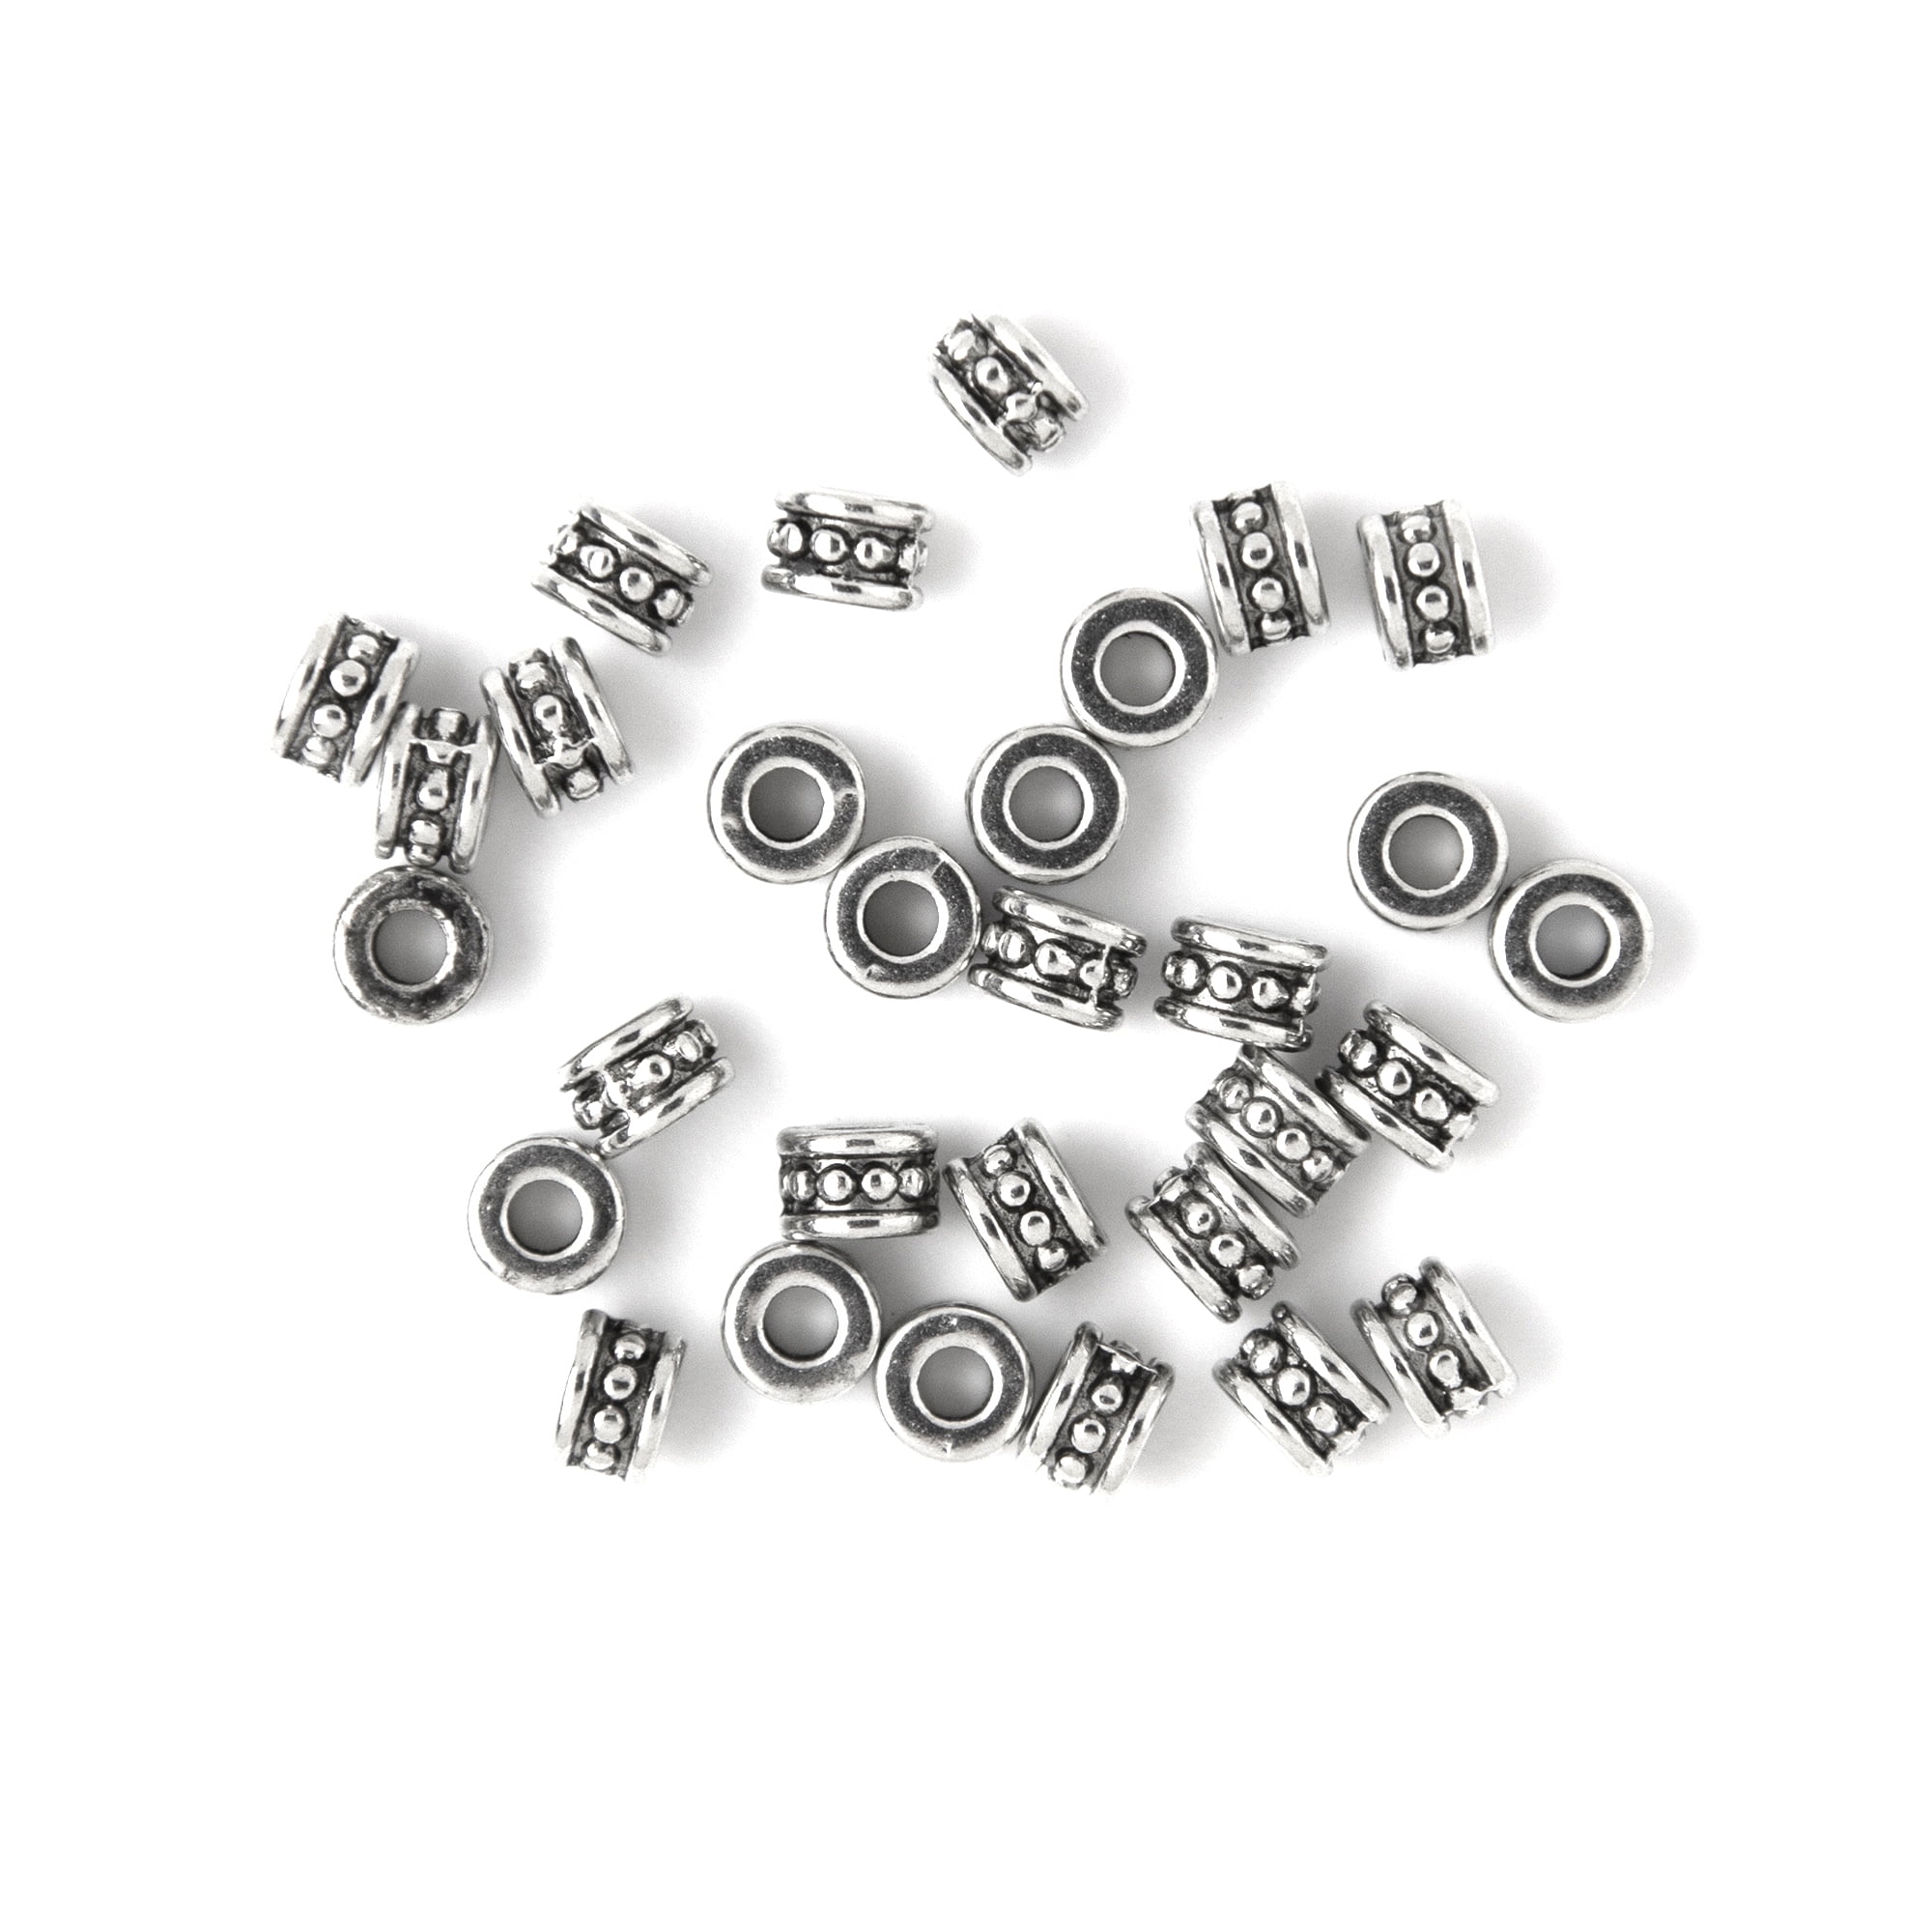 100pcs 8mm (0.31 Inch) Silver Pumpkin Corrugated Loose Round Metal Spacer  Beads for Jewelry Craft Making CF92-8